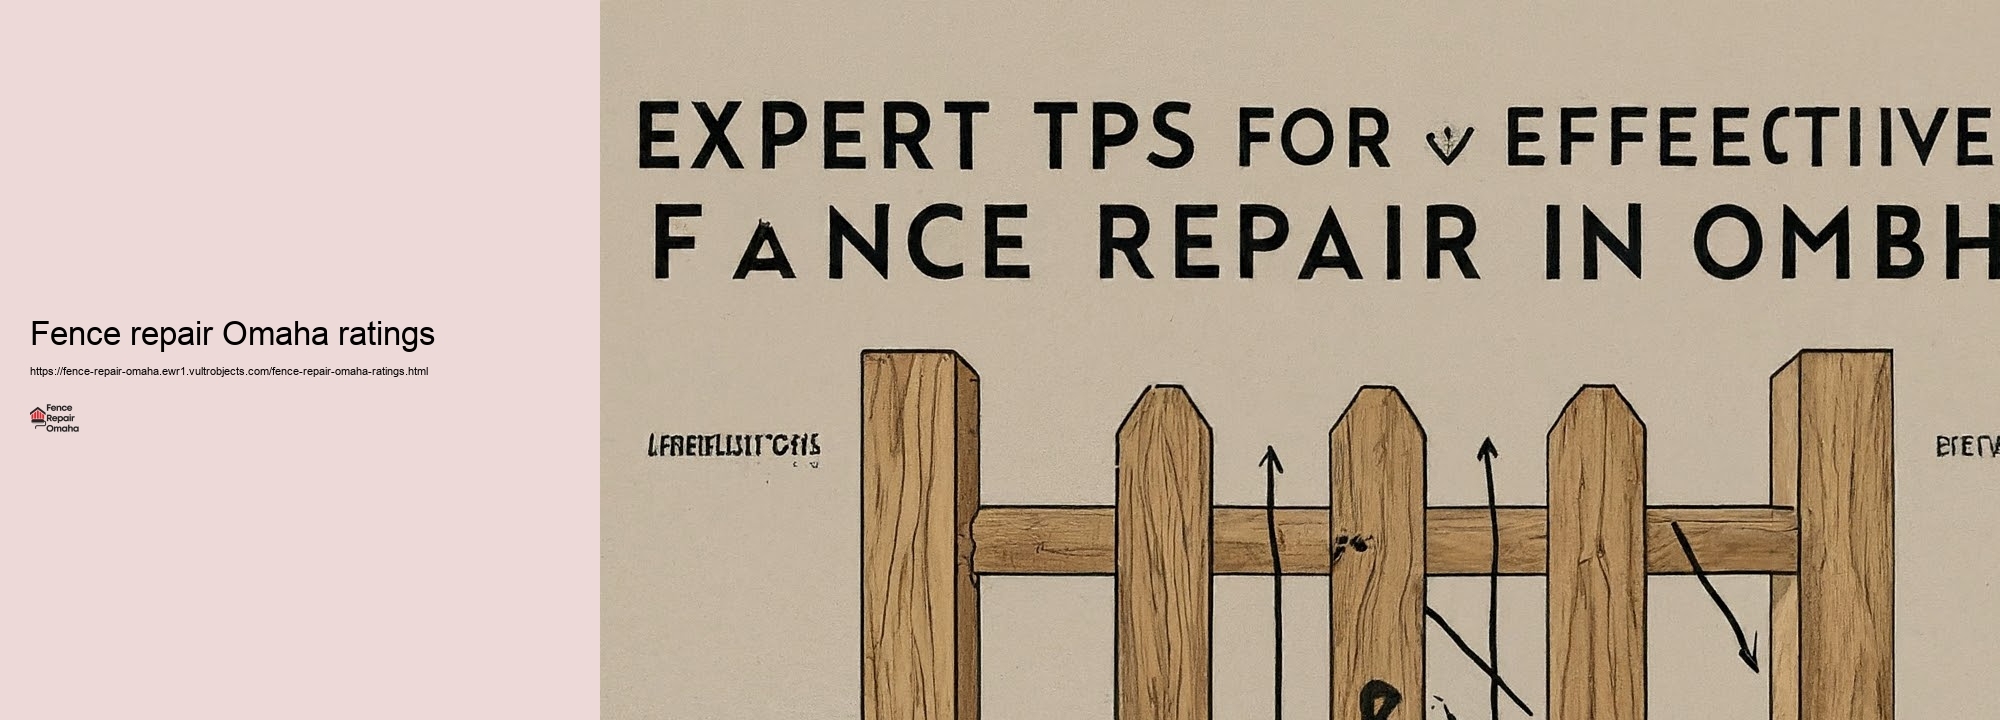 Specialist Tips for Reliable Fencing Repair in Omaha